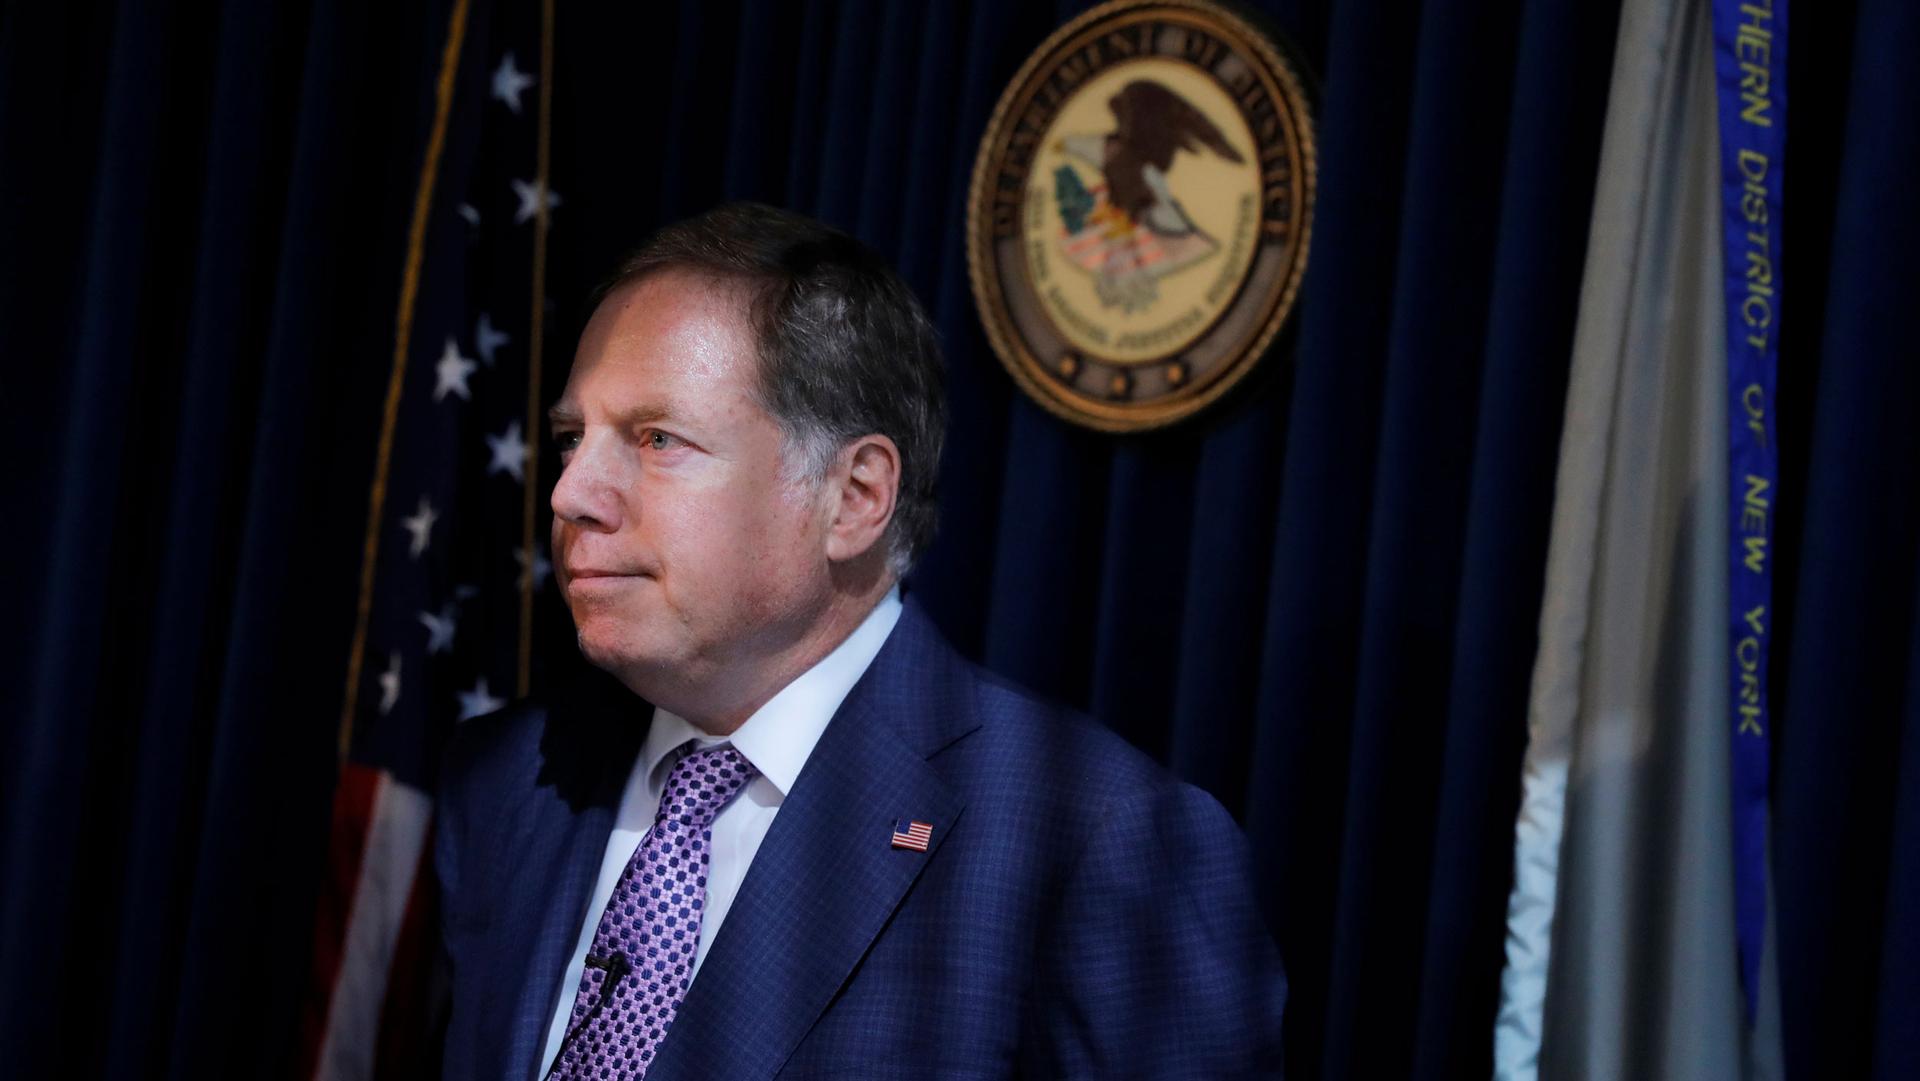 US Attorney for the Southern District Geoffrey Berman is shown wearing a dark suit and purple tie with a US flag behind him.